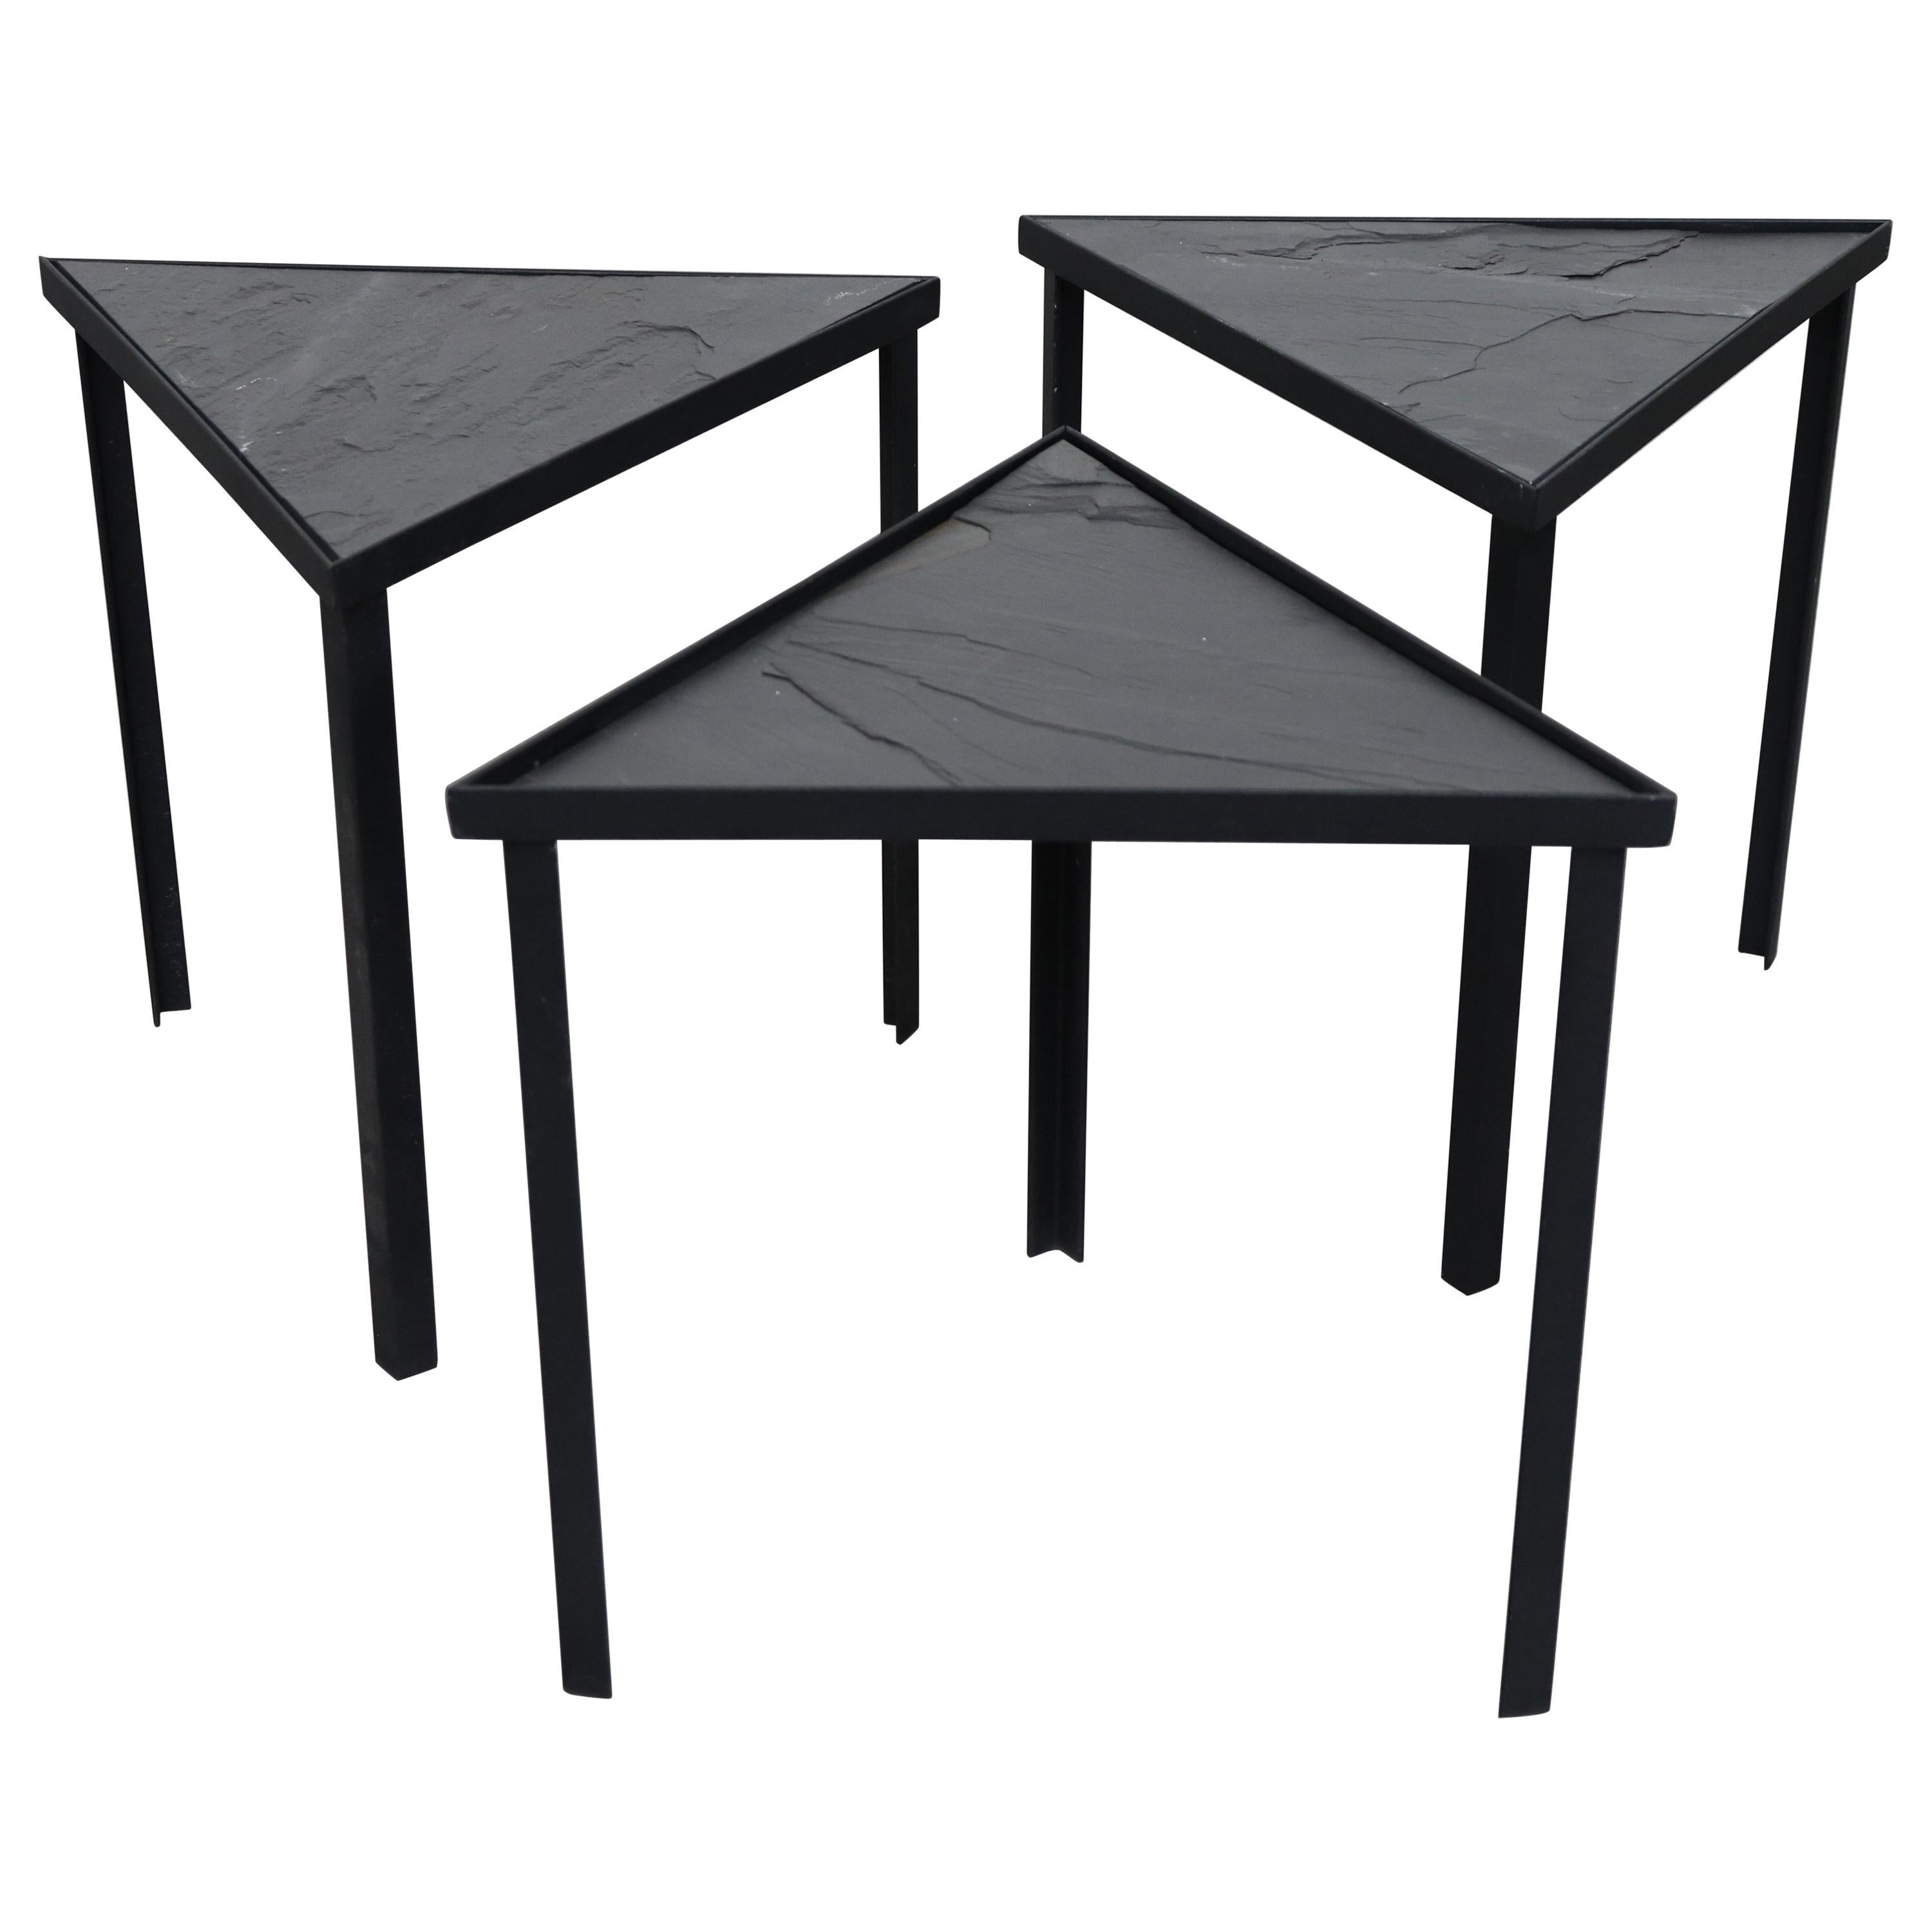 Midcentury Inspired Slate Stacking Tables